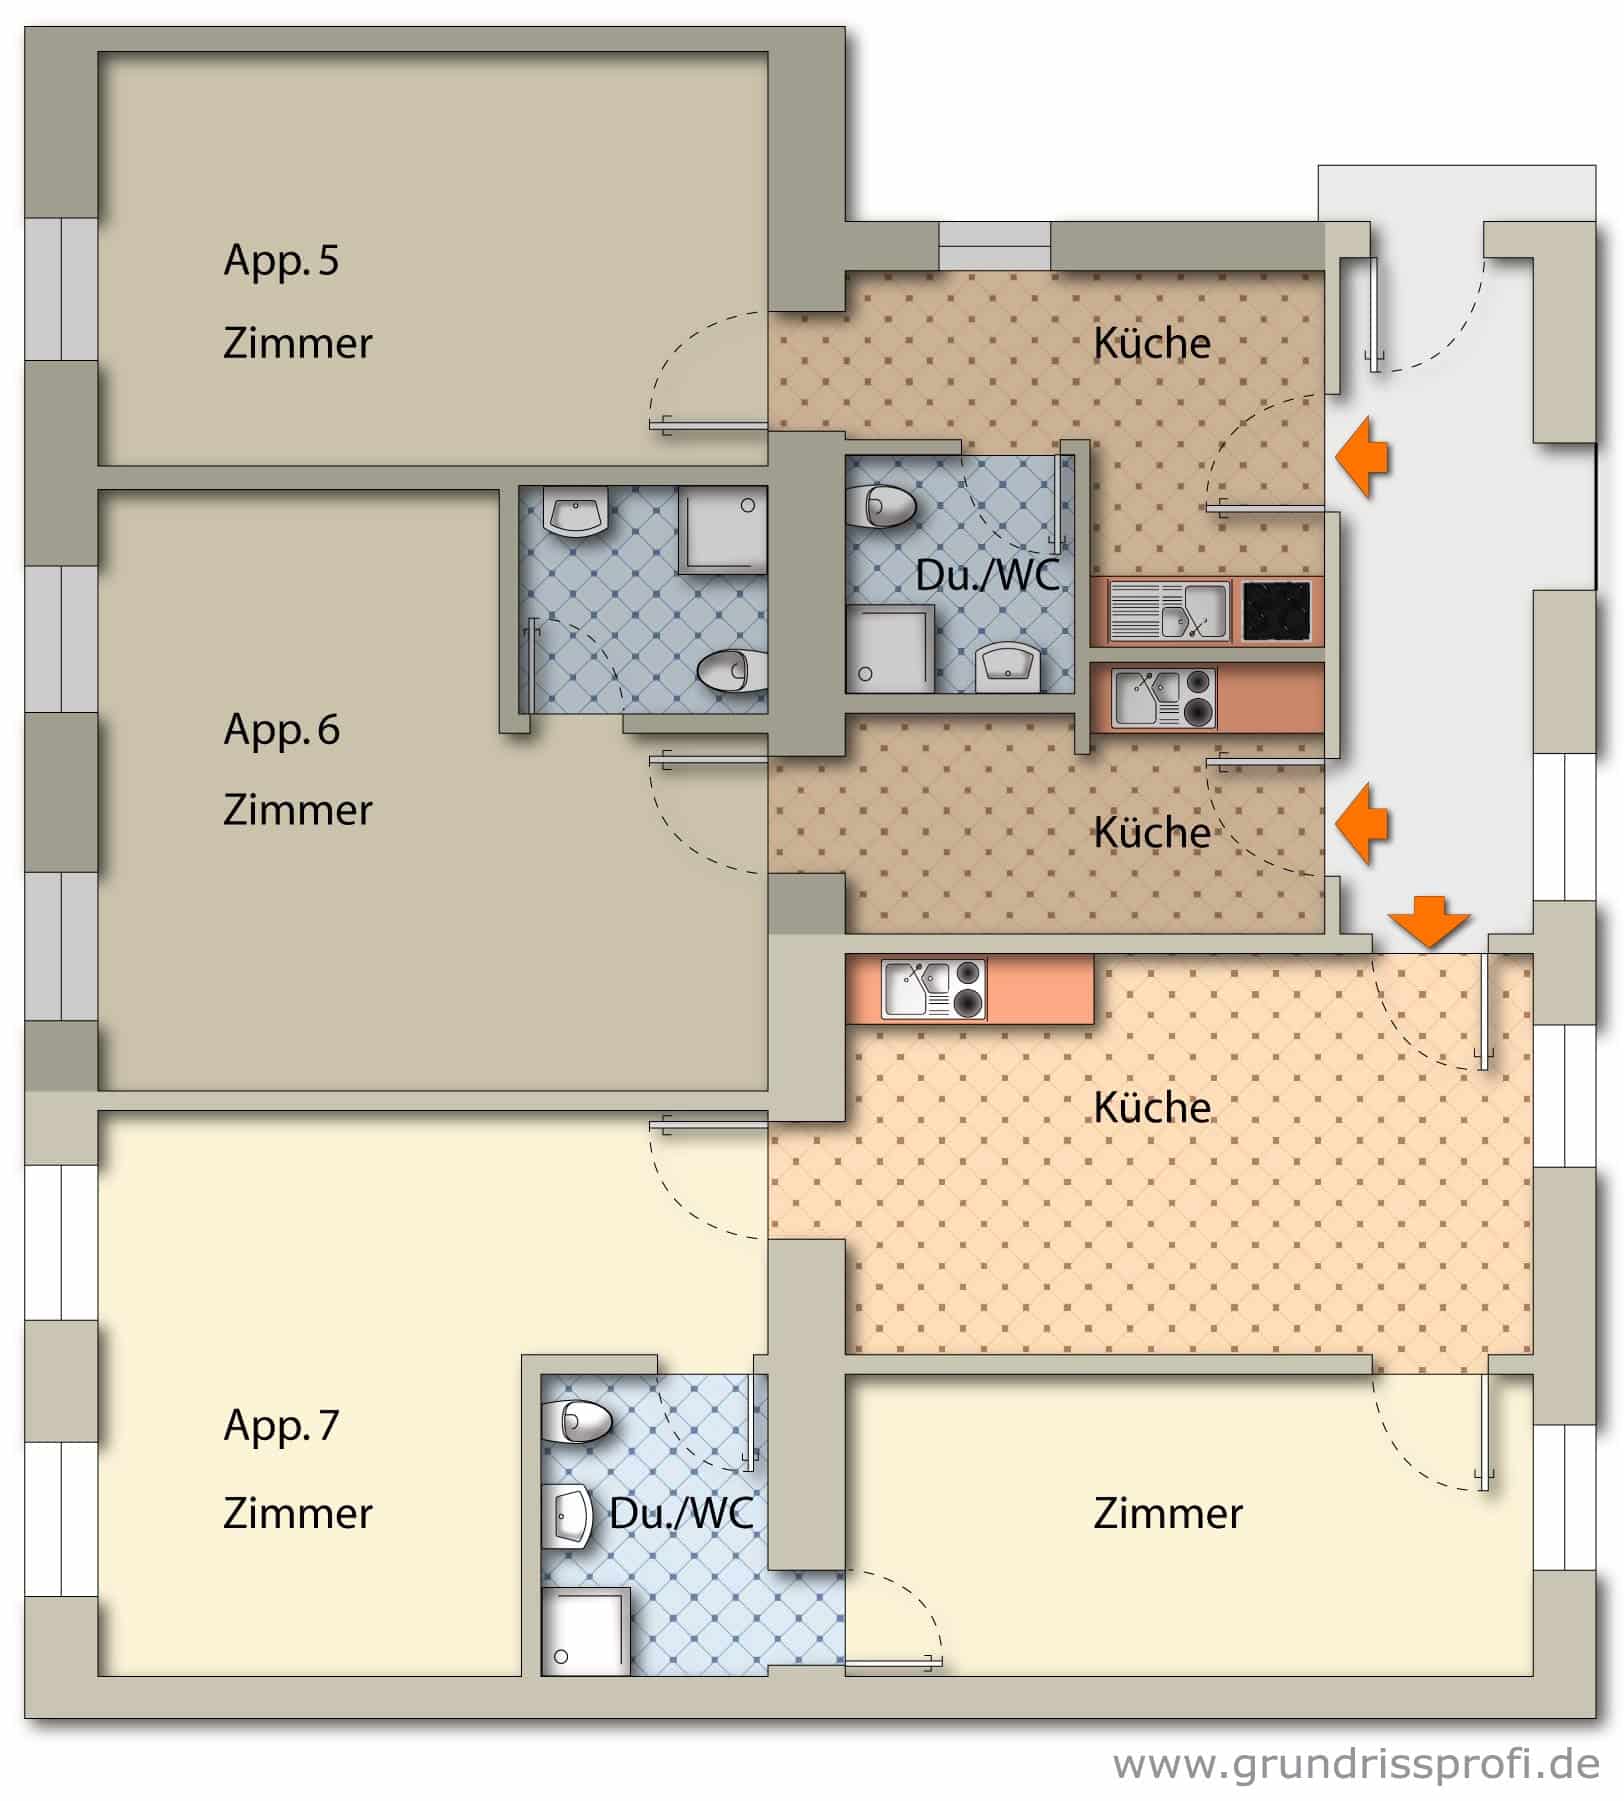 Apartment 7 ground plan of the floor